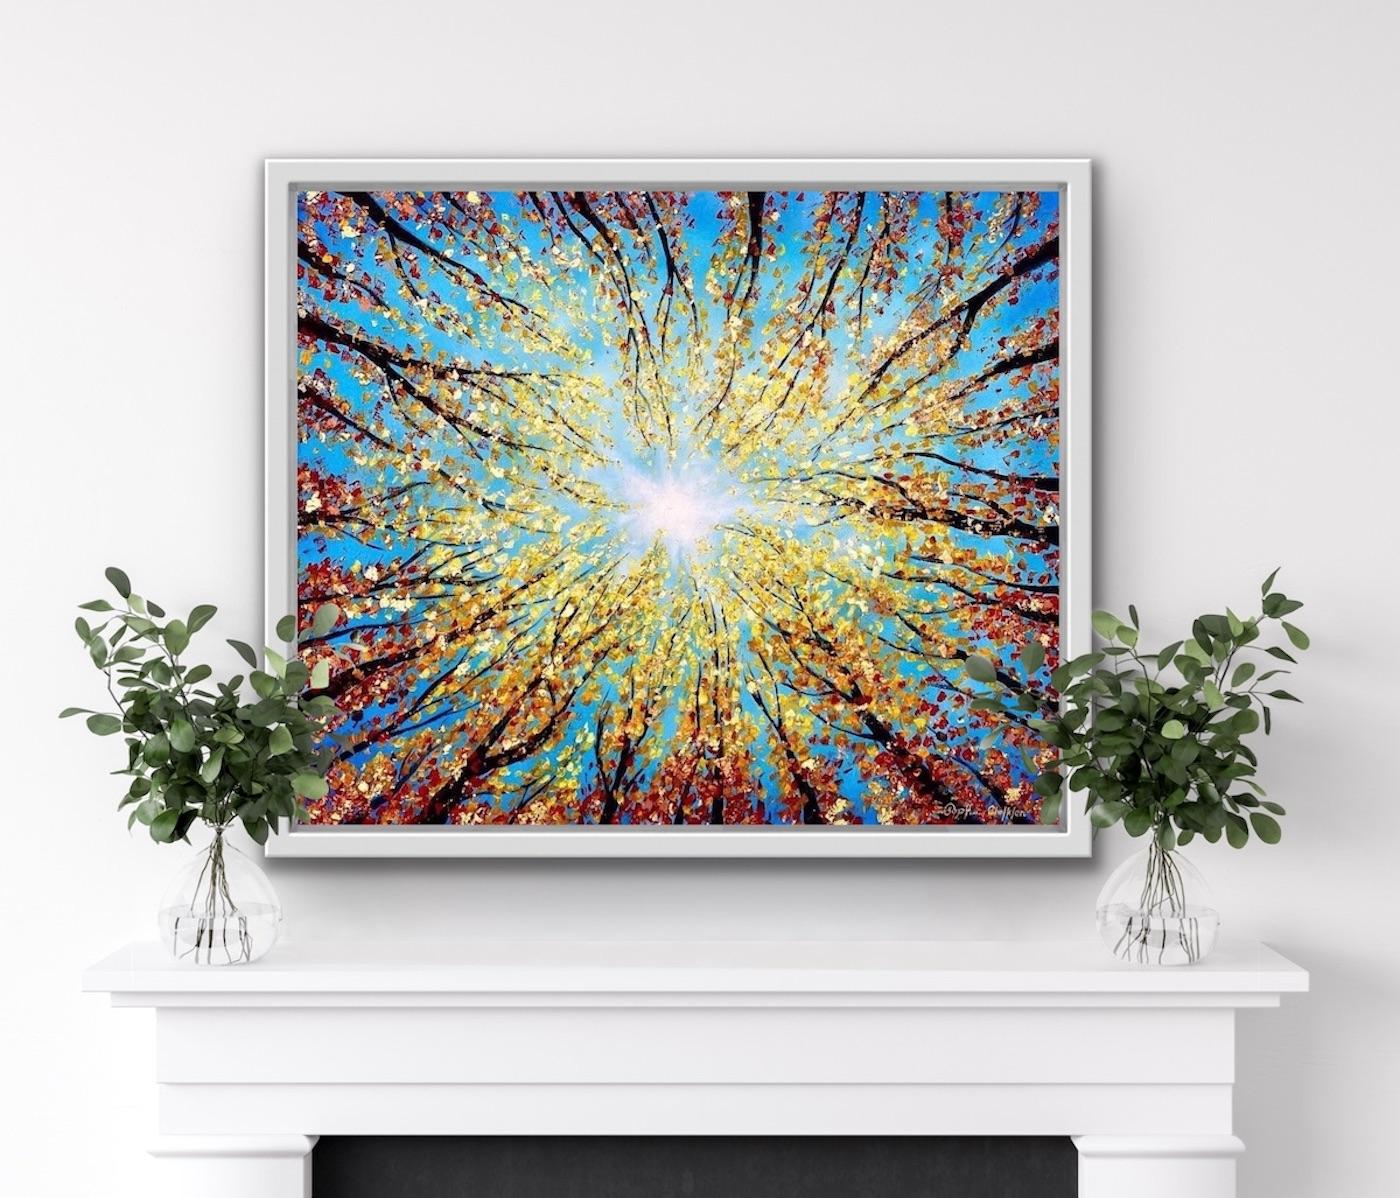 Reach For the Light by Sophia Chalklen [2022]
original and hang signed by the artist 

Oil on box canvas with Embellished with 24ct Gold, copper and bronze leaf.

Image size: H:51 cm x W:61 cm

Complete Size of Unframed Work: H:51 cm x W:61 cm x